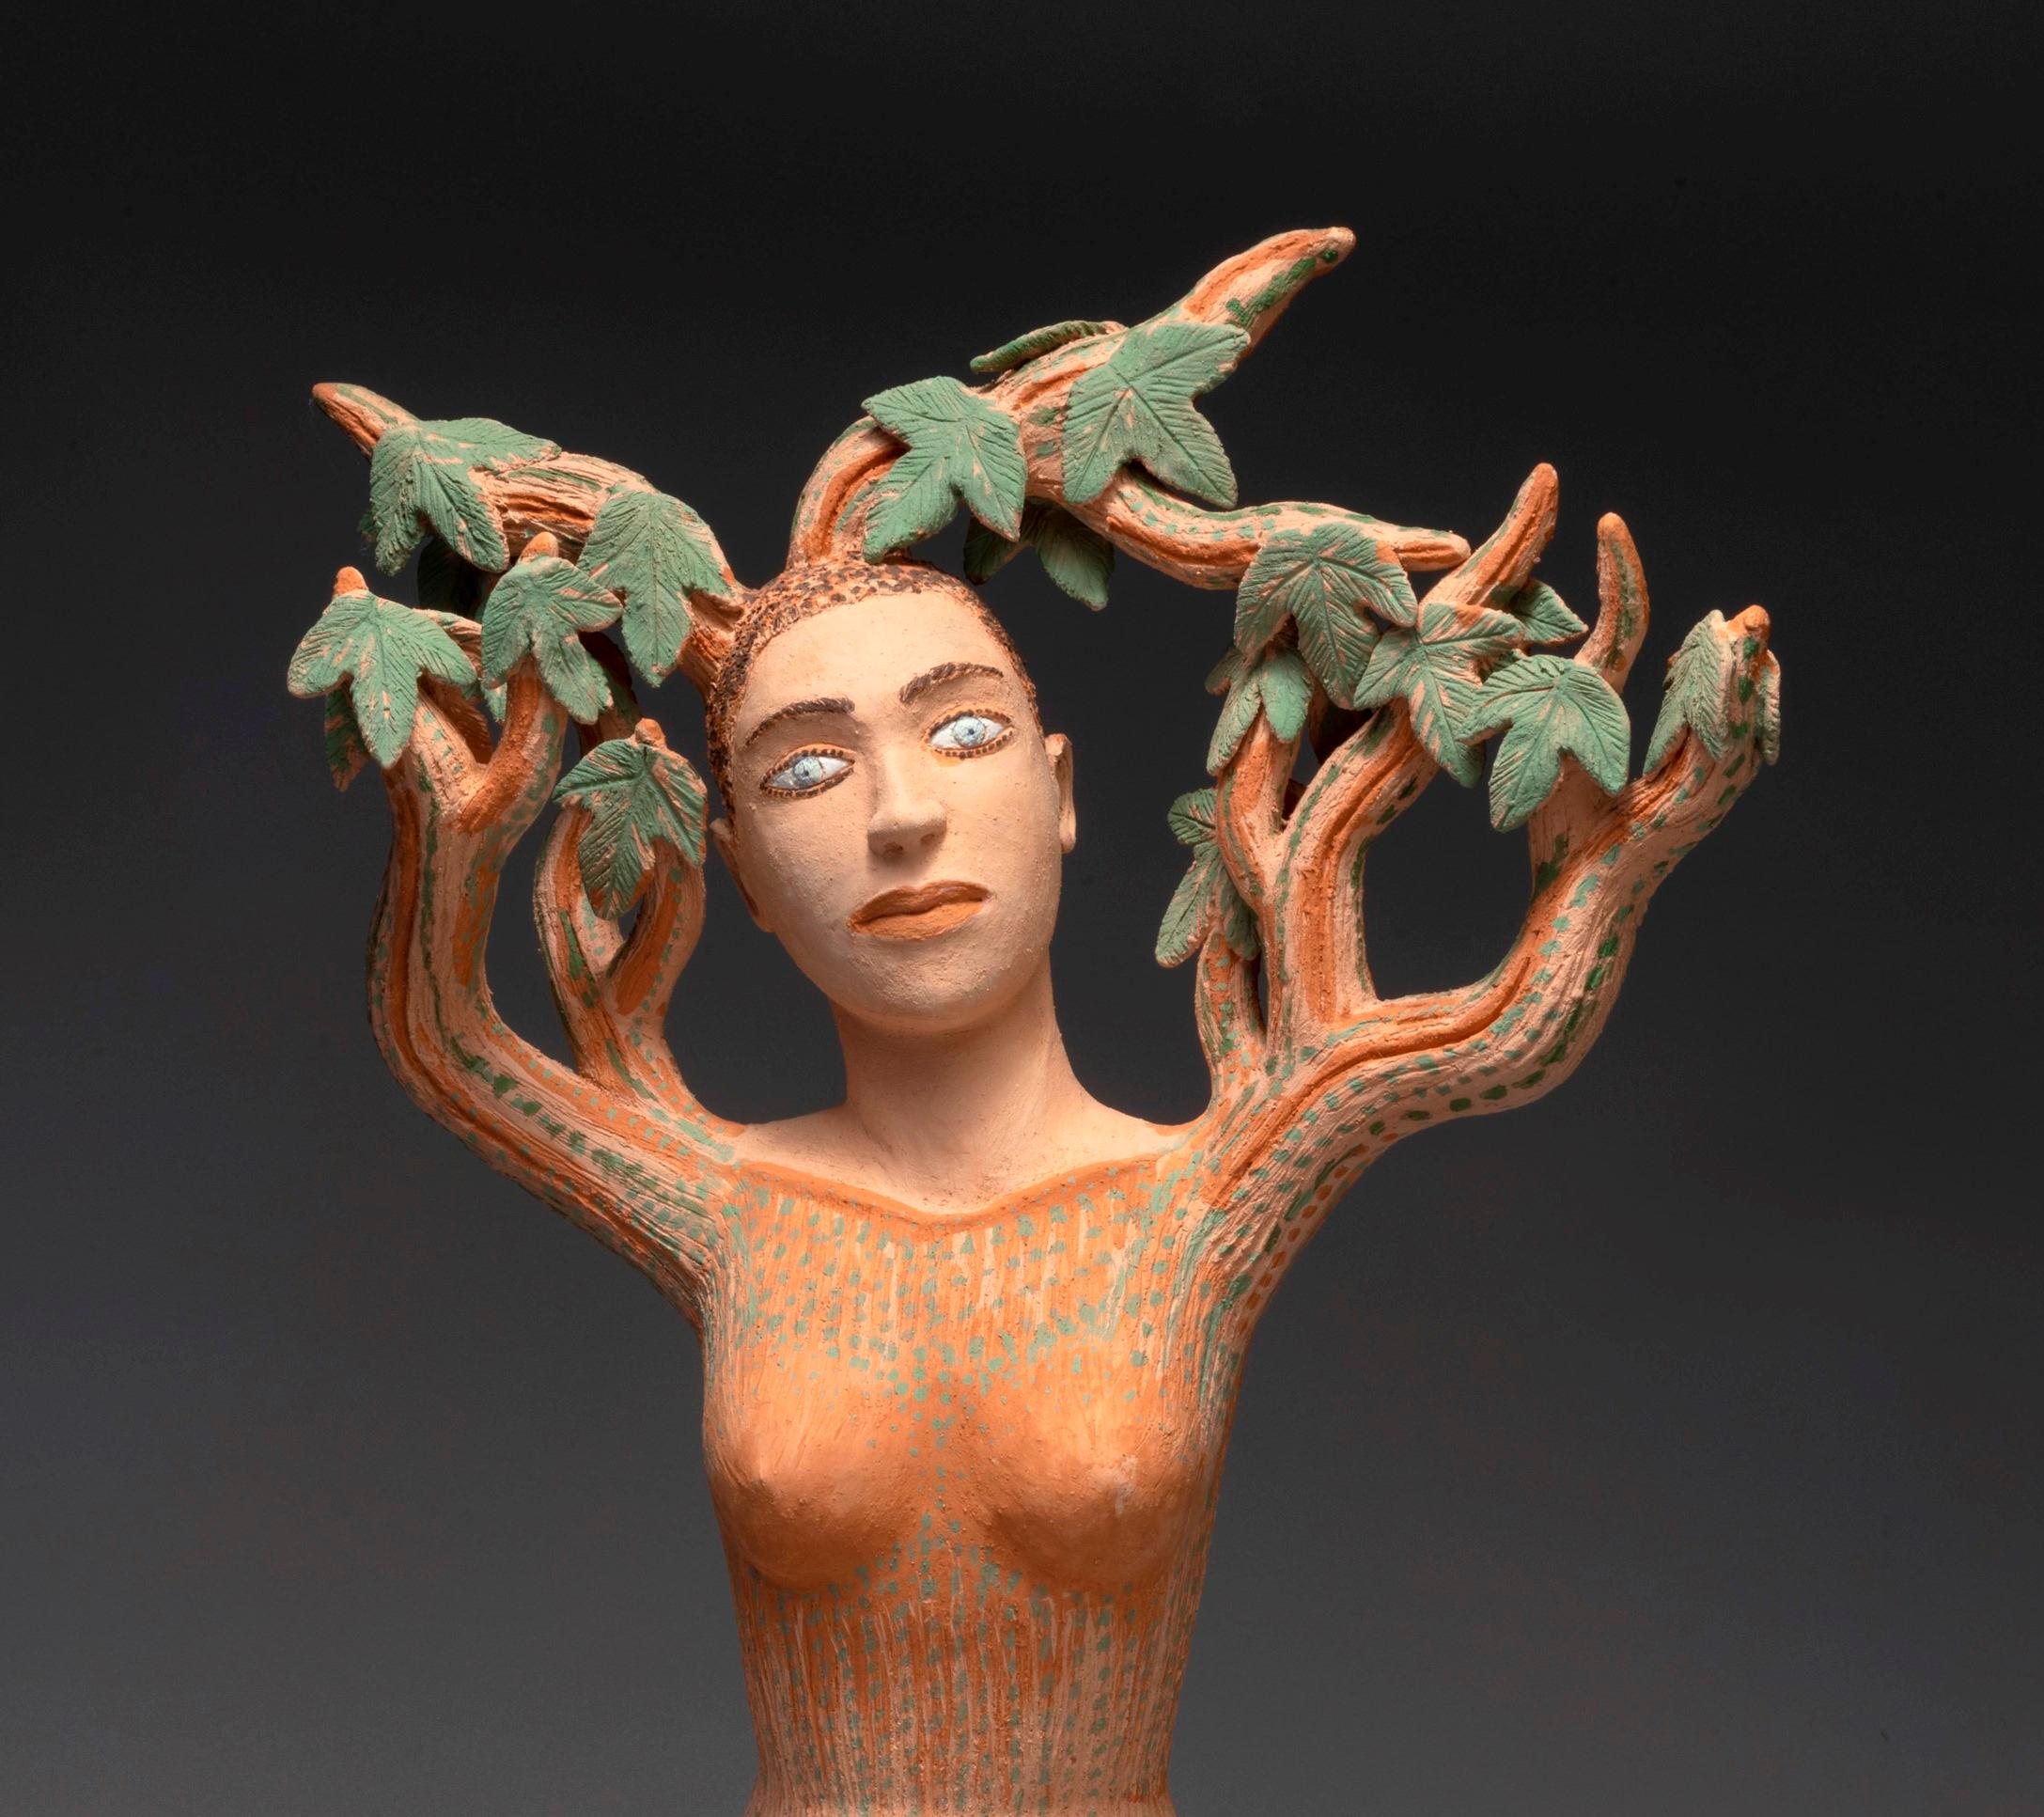 Unique terracotta sculpture
Signed by the artist

The contemplative creatures of Nili Pincas, of an extreme refinement, invite silence.
This isolation of the sculpted being seizes and soothes, at the same time as it questions.

Are we facing the